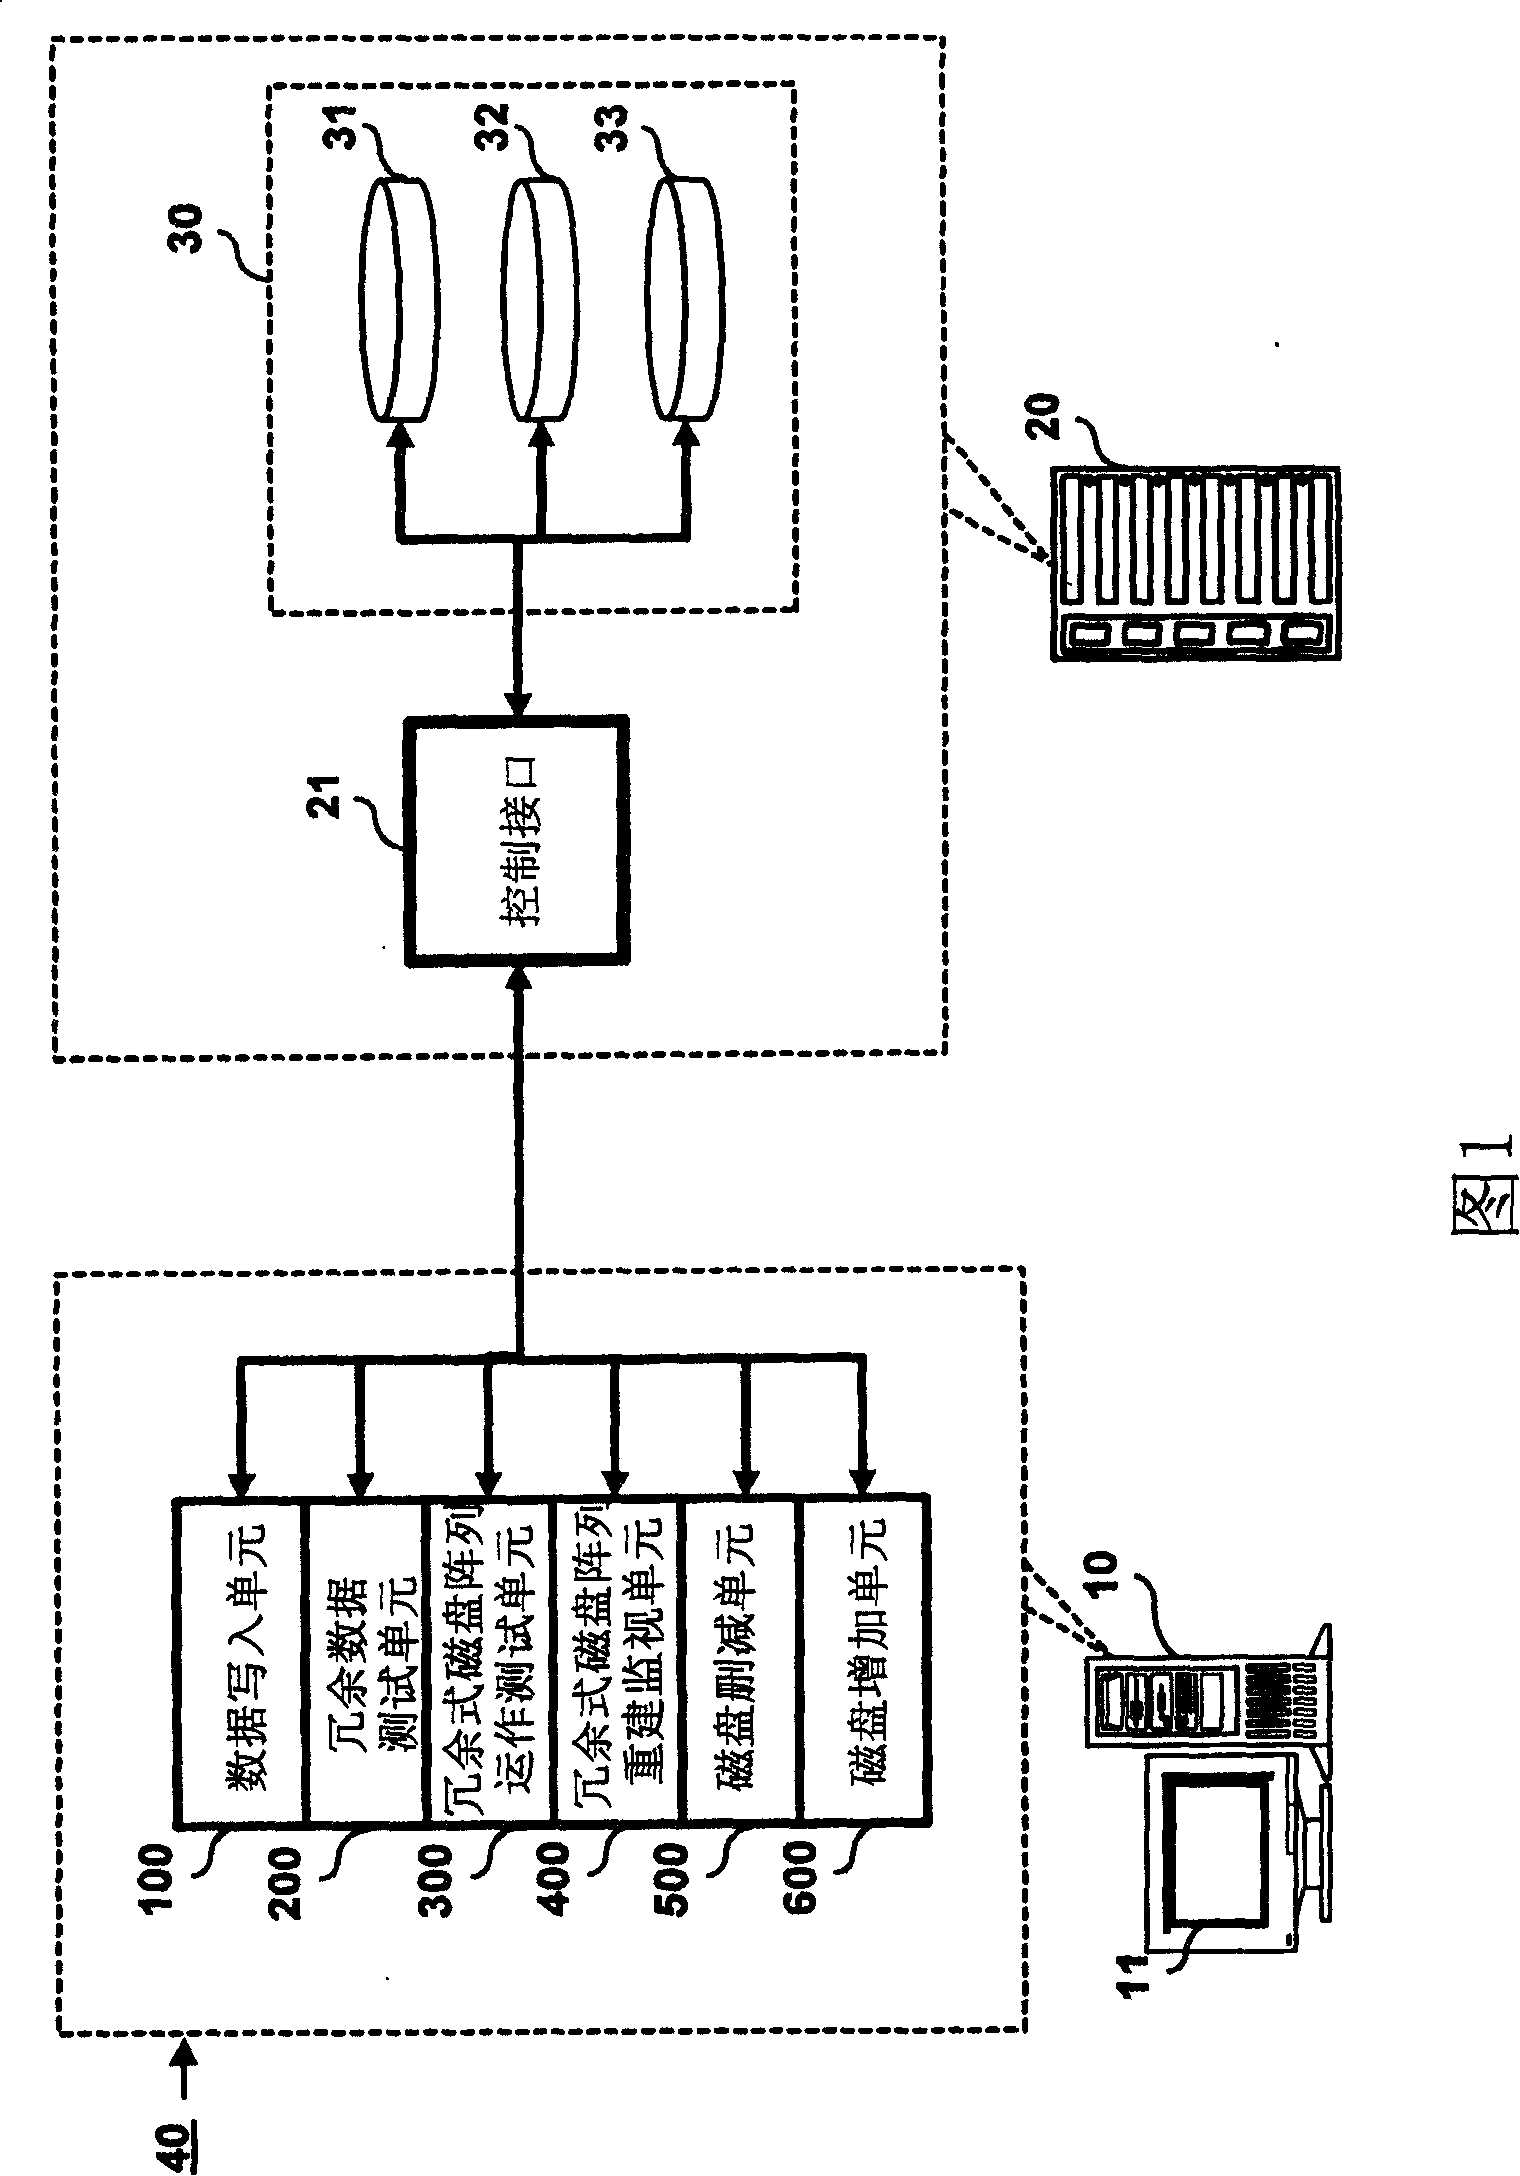 Redundance type magnetic disc array storage data reliability test method and system